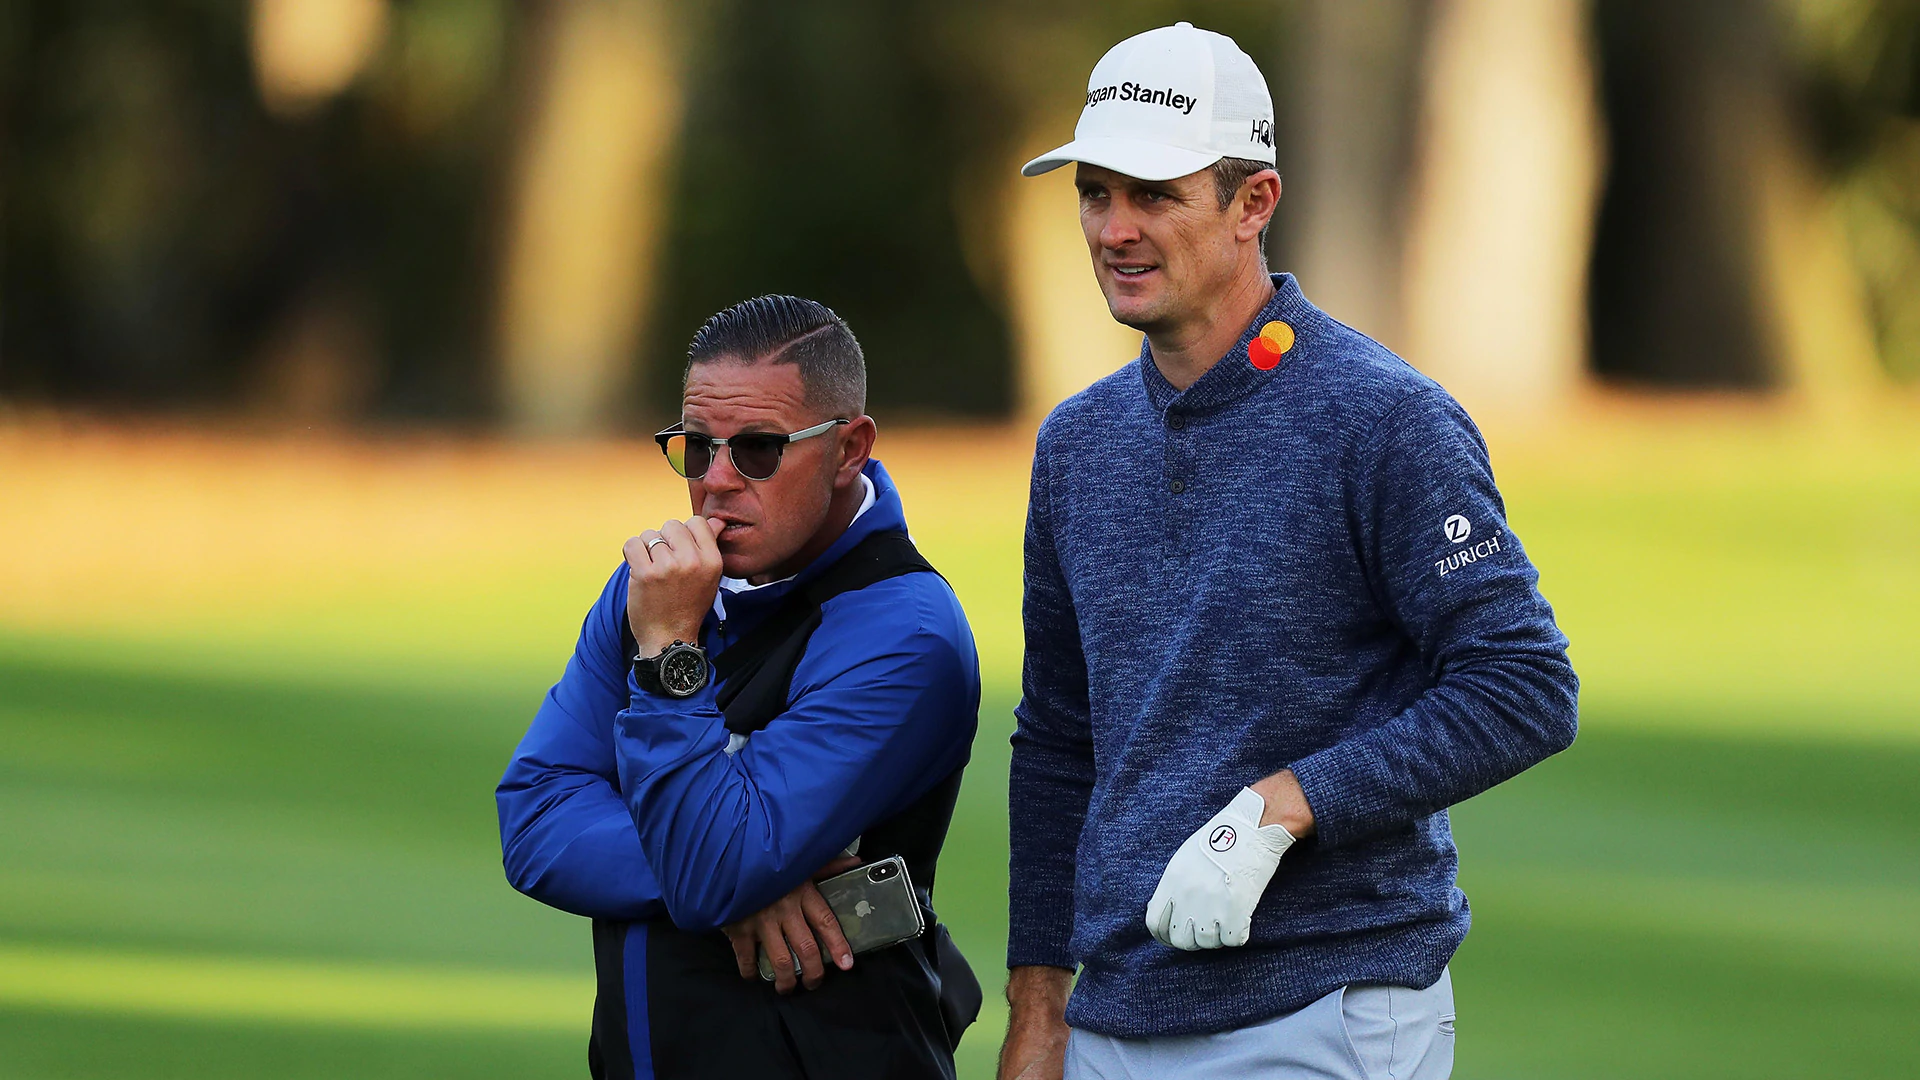 More change for Justin Rose, who has split with swing coach Sean Foley